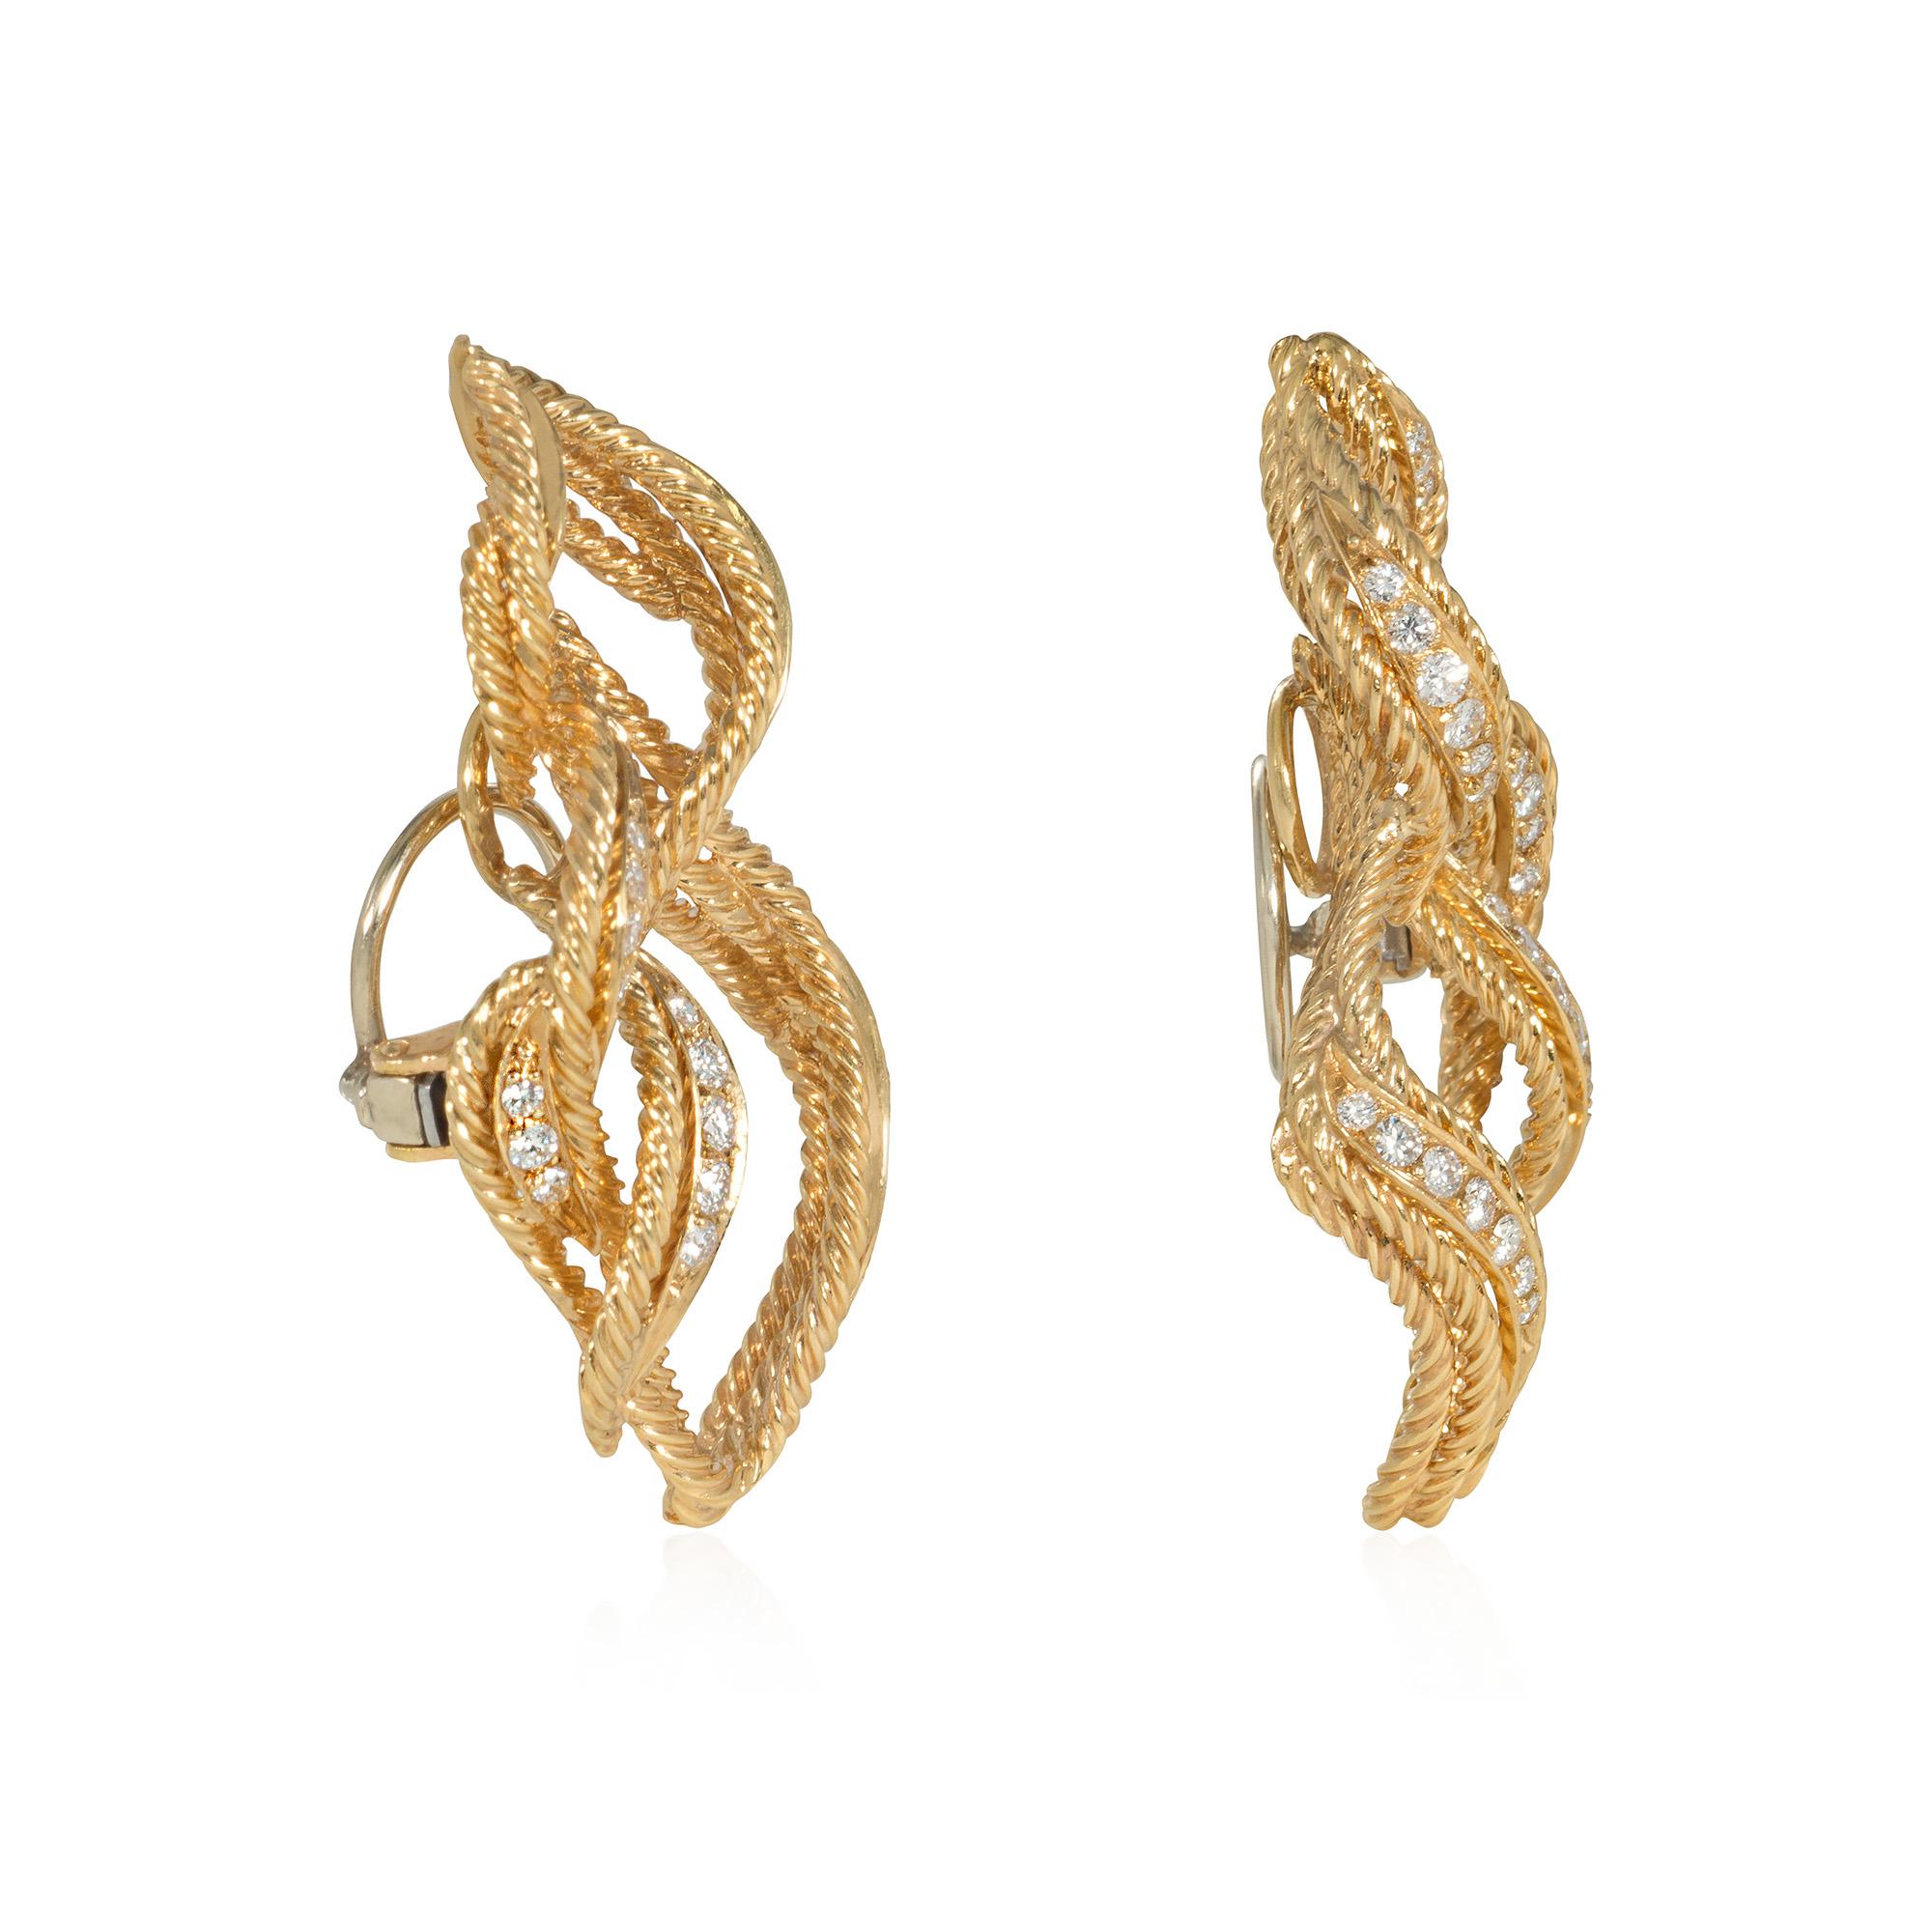 A pair of rope twist gold and diamond earrings designed as open stylized flames, in 18k with clip backs. Chaumet, Paris.  Atw diamonds 1.14 cts.

One of the oldest continuously operating fine jewelry houses, Chaumet was founded in 1780 by